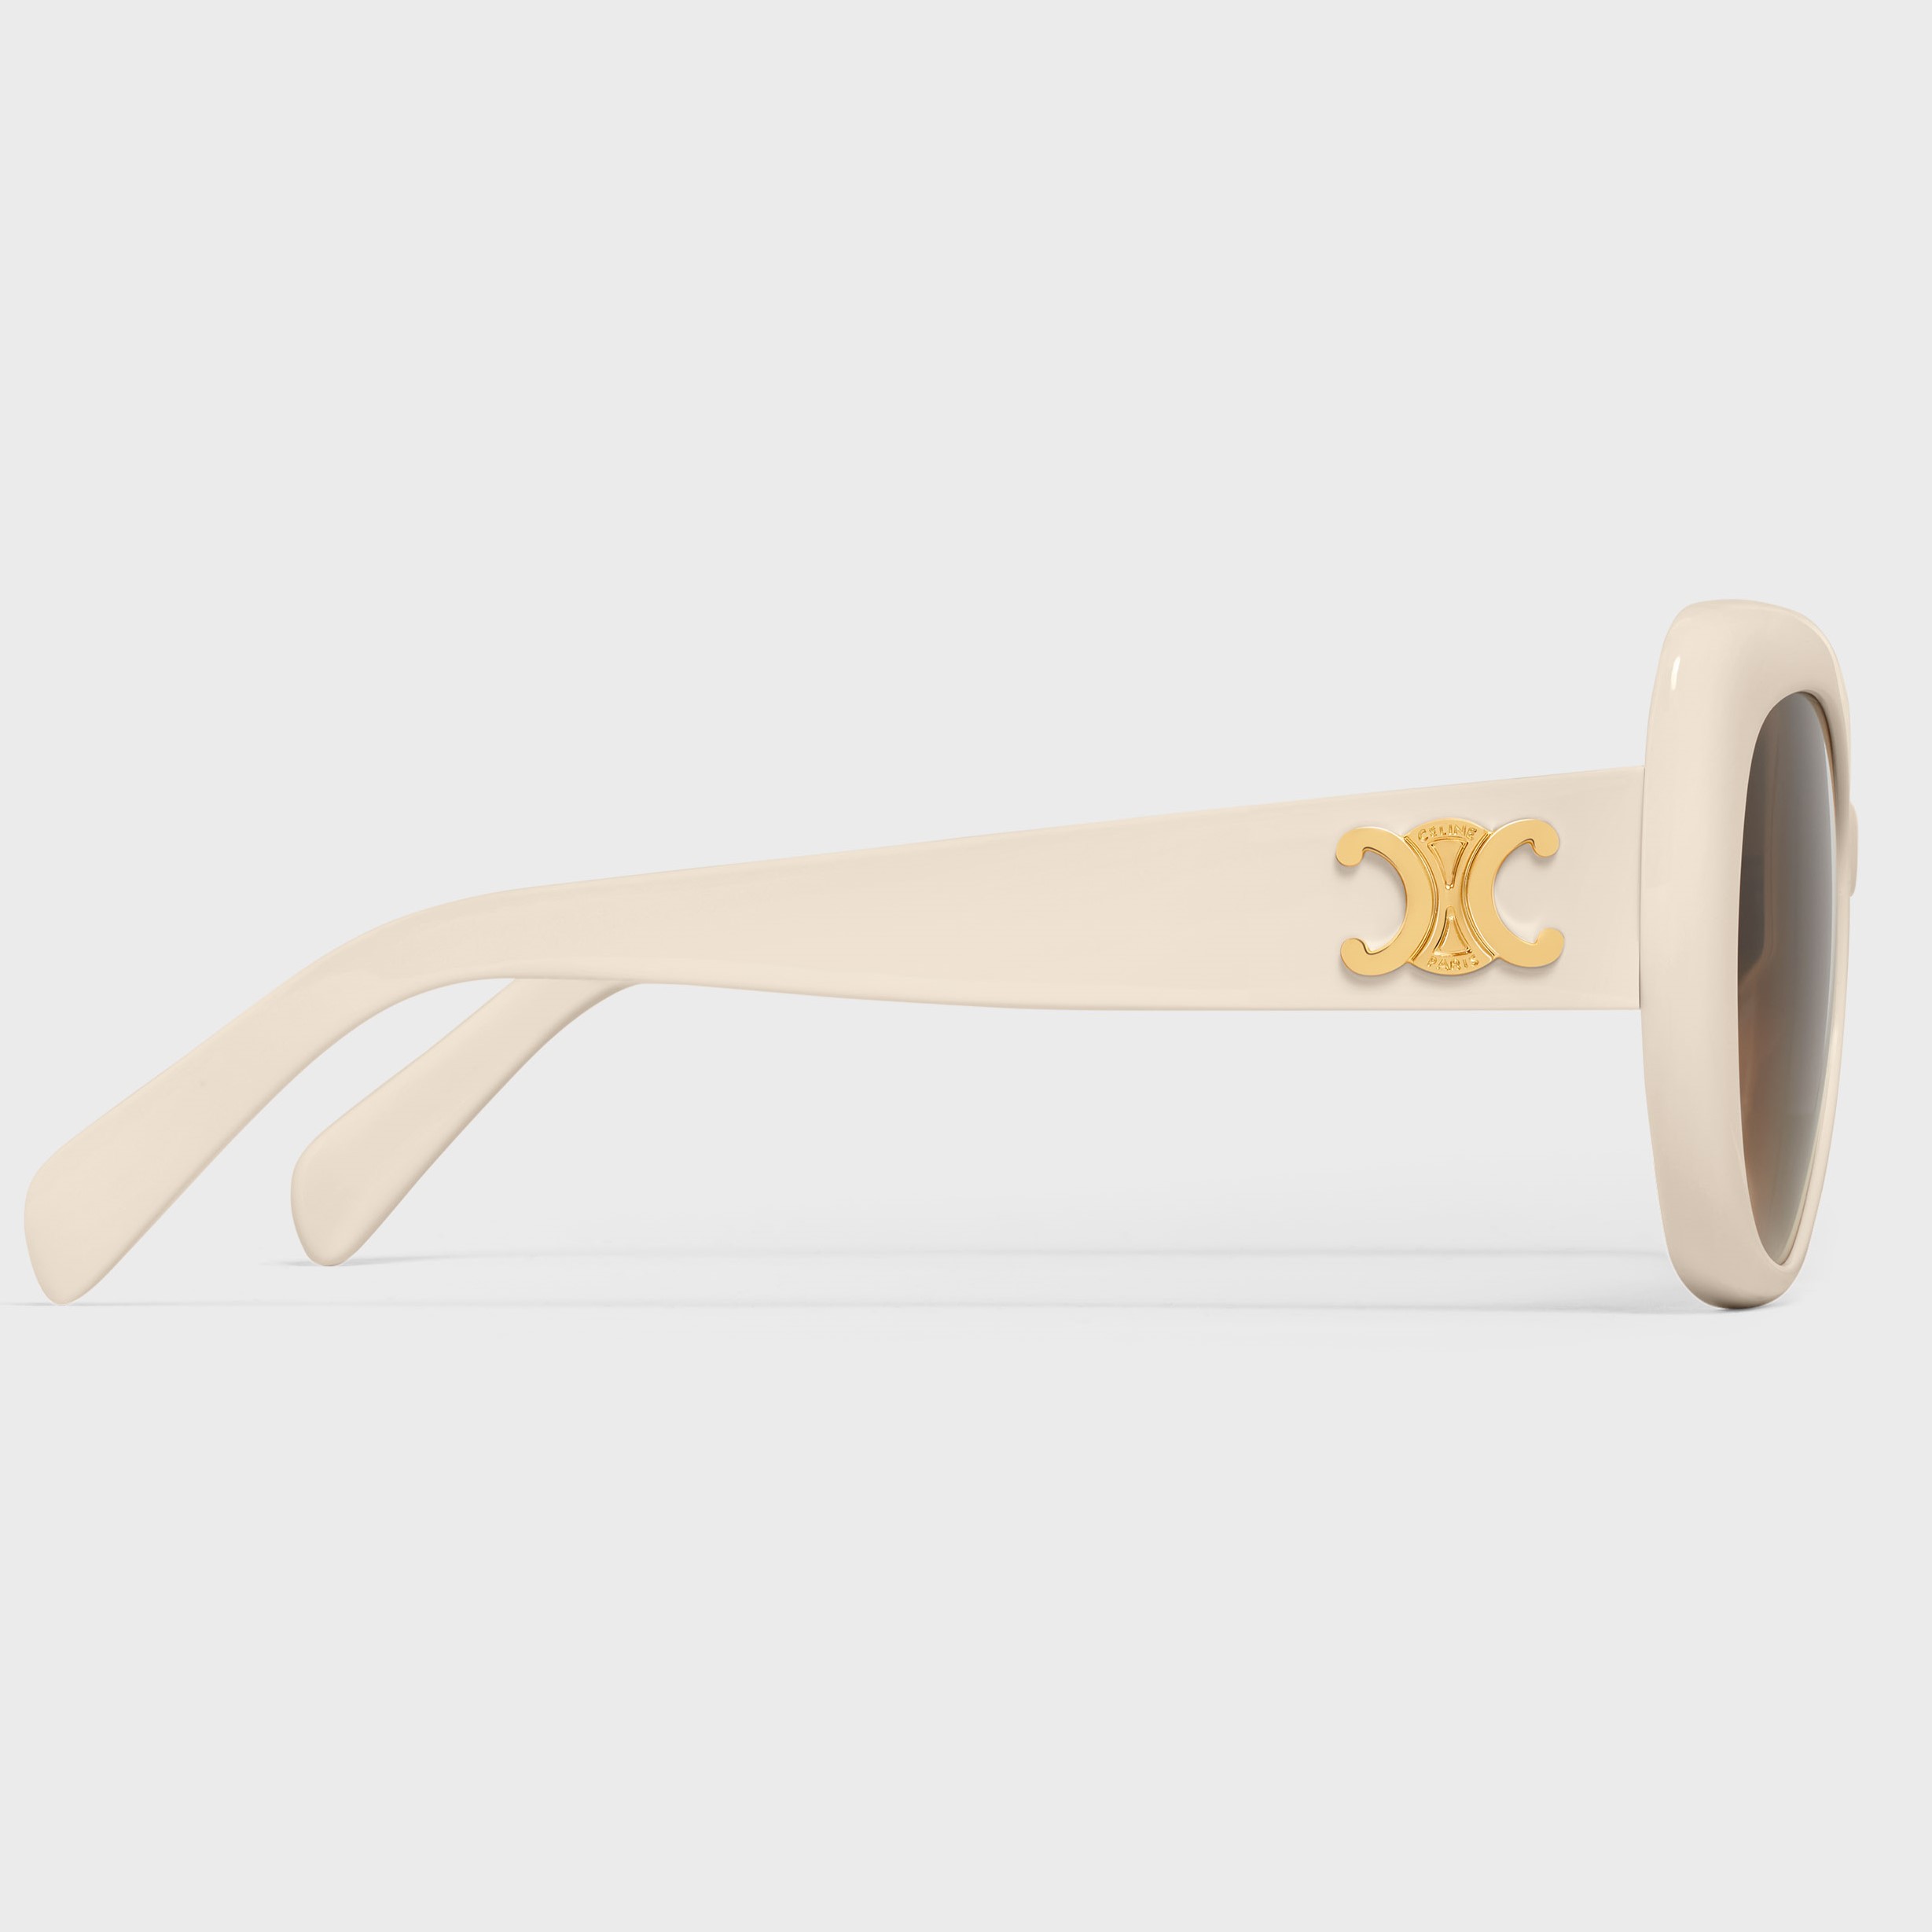 MẮT KÍNH NỮ CELINE TRIOMPHE 06 SUNGLASSES IN IVORY SQUARE ACETATE 10